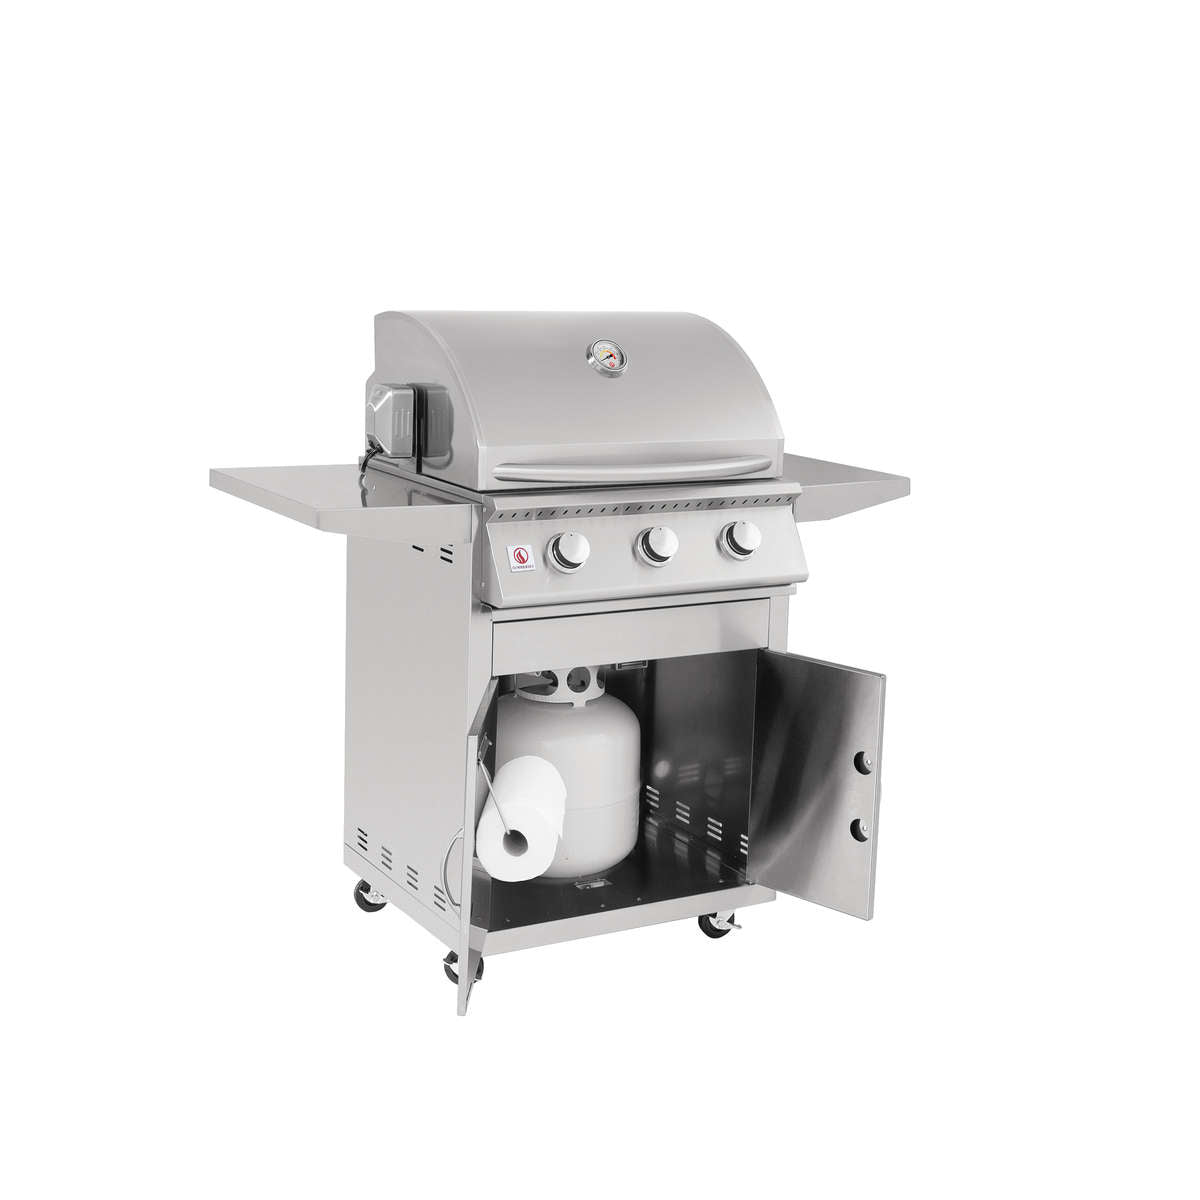 Summerset Sizzler 26 Inch Natural Gas Grill on Cart